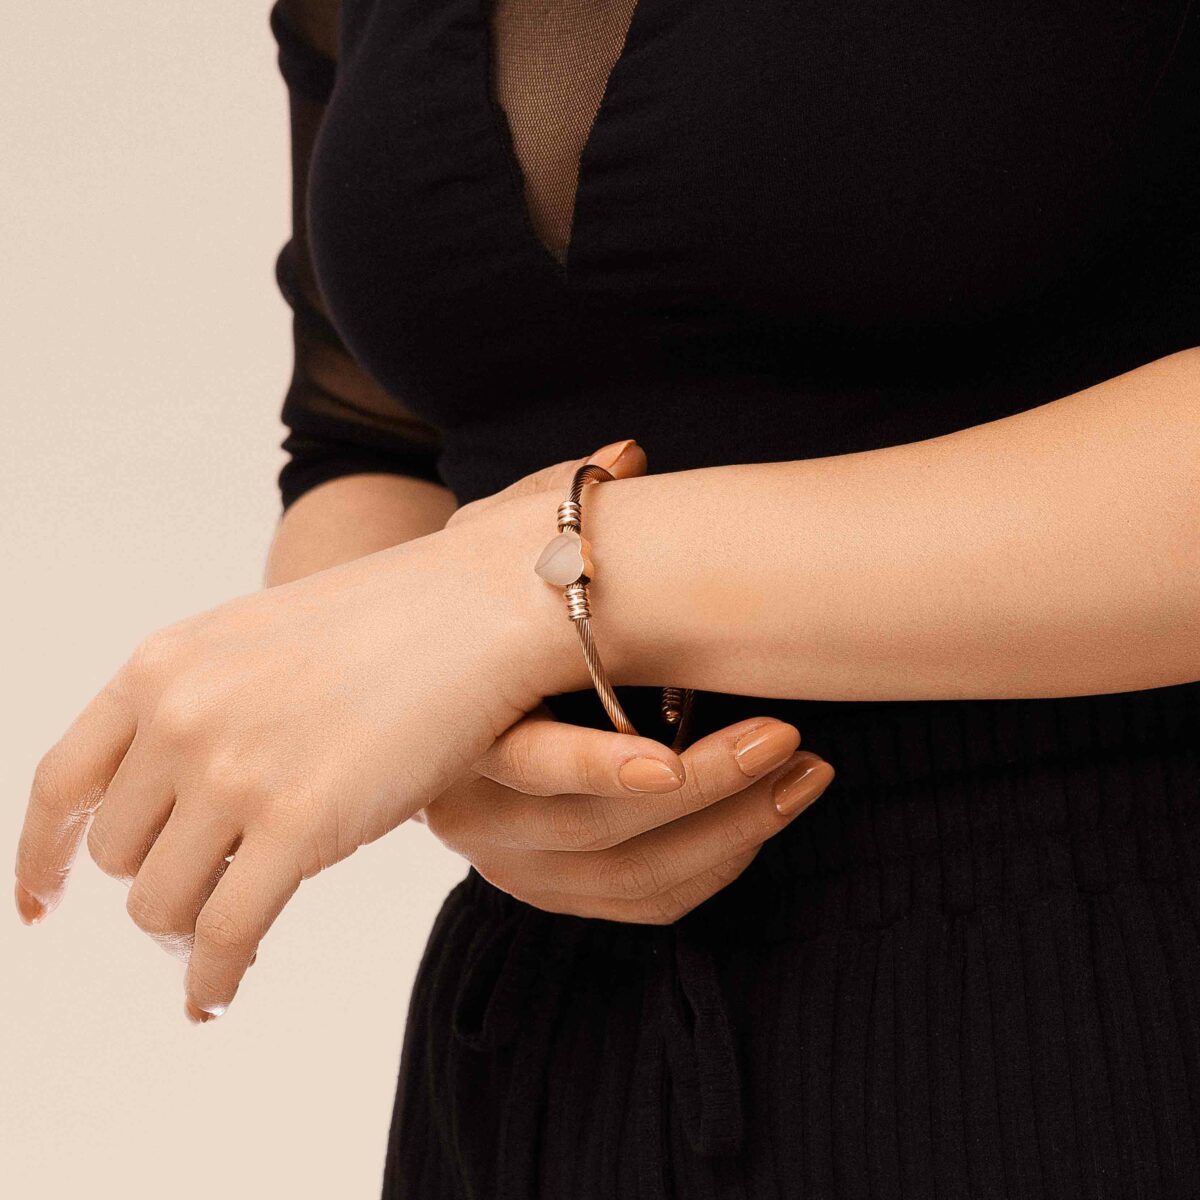 https://m.clubbella.co/product/rope-heart-rose-gold-bangle/ sszz-33